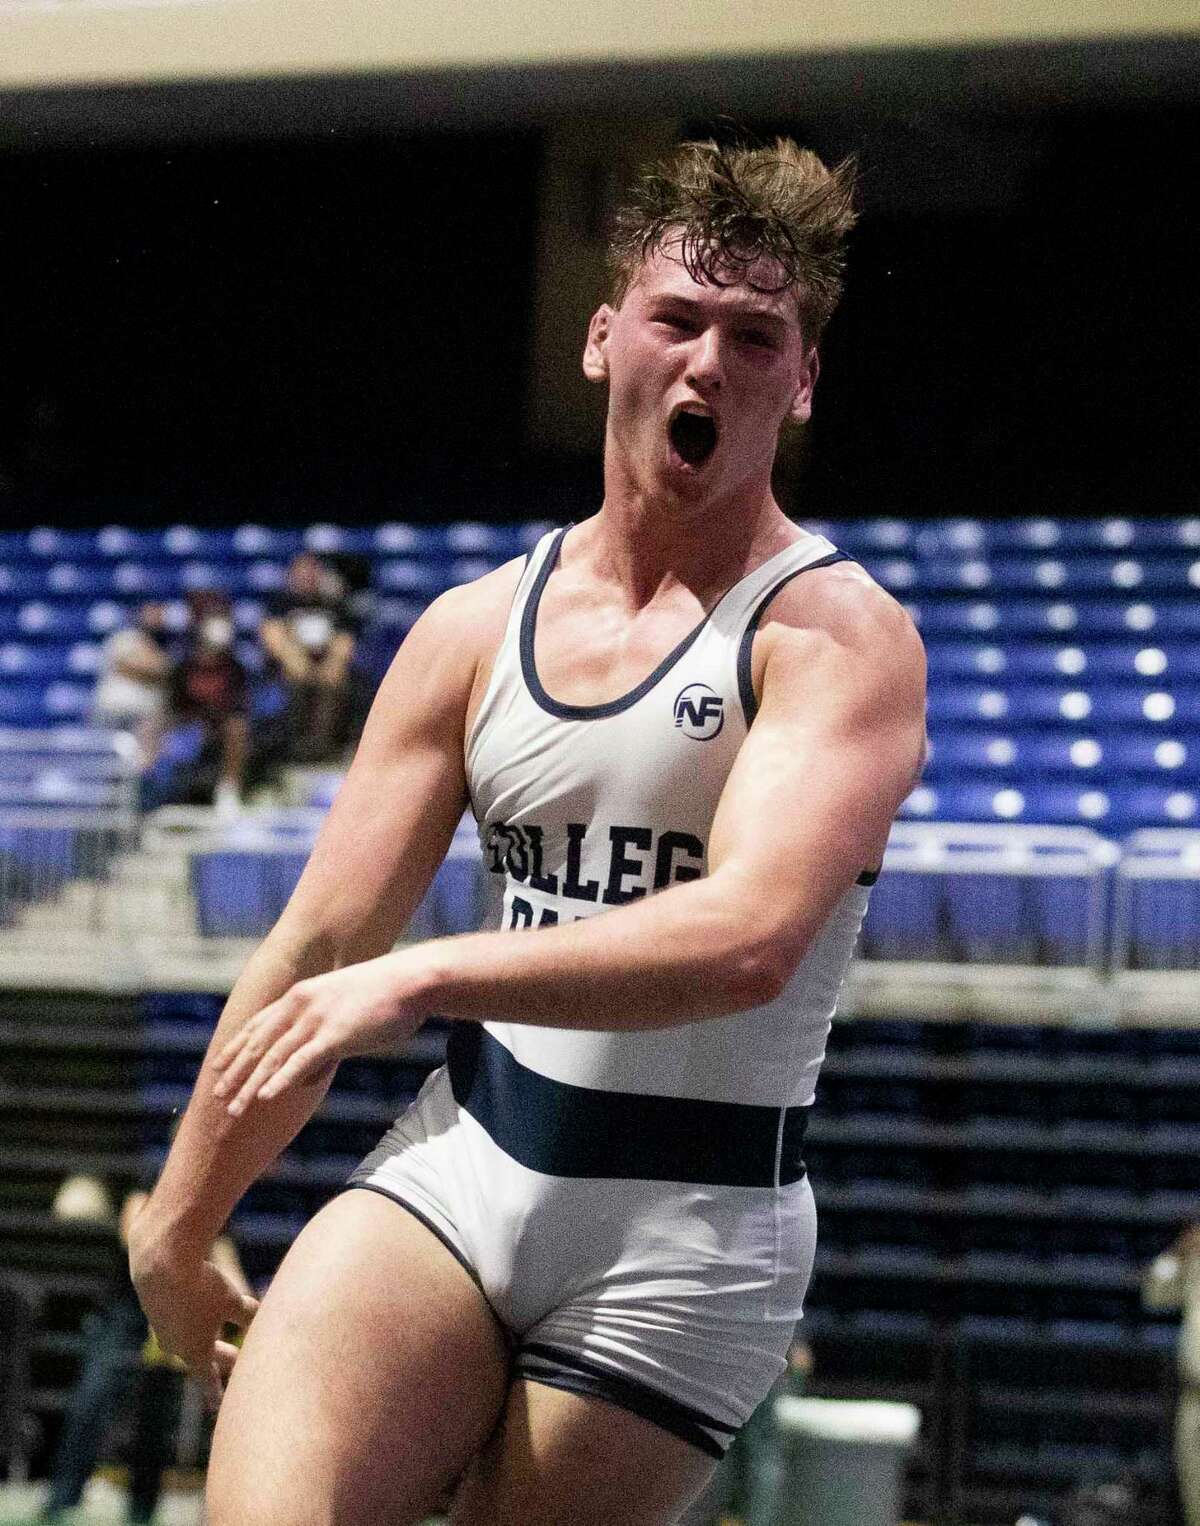 Jonathan Wertz of College Park reacts after defeating Farid Mobarak of Plano West in the Class 6A boys 182-pound championship during the UIL State Wrestling Championships, Saturday, April 24, 2021, in Cypress.